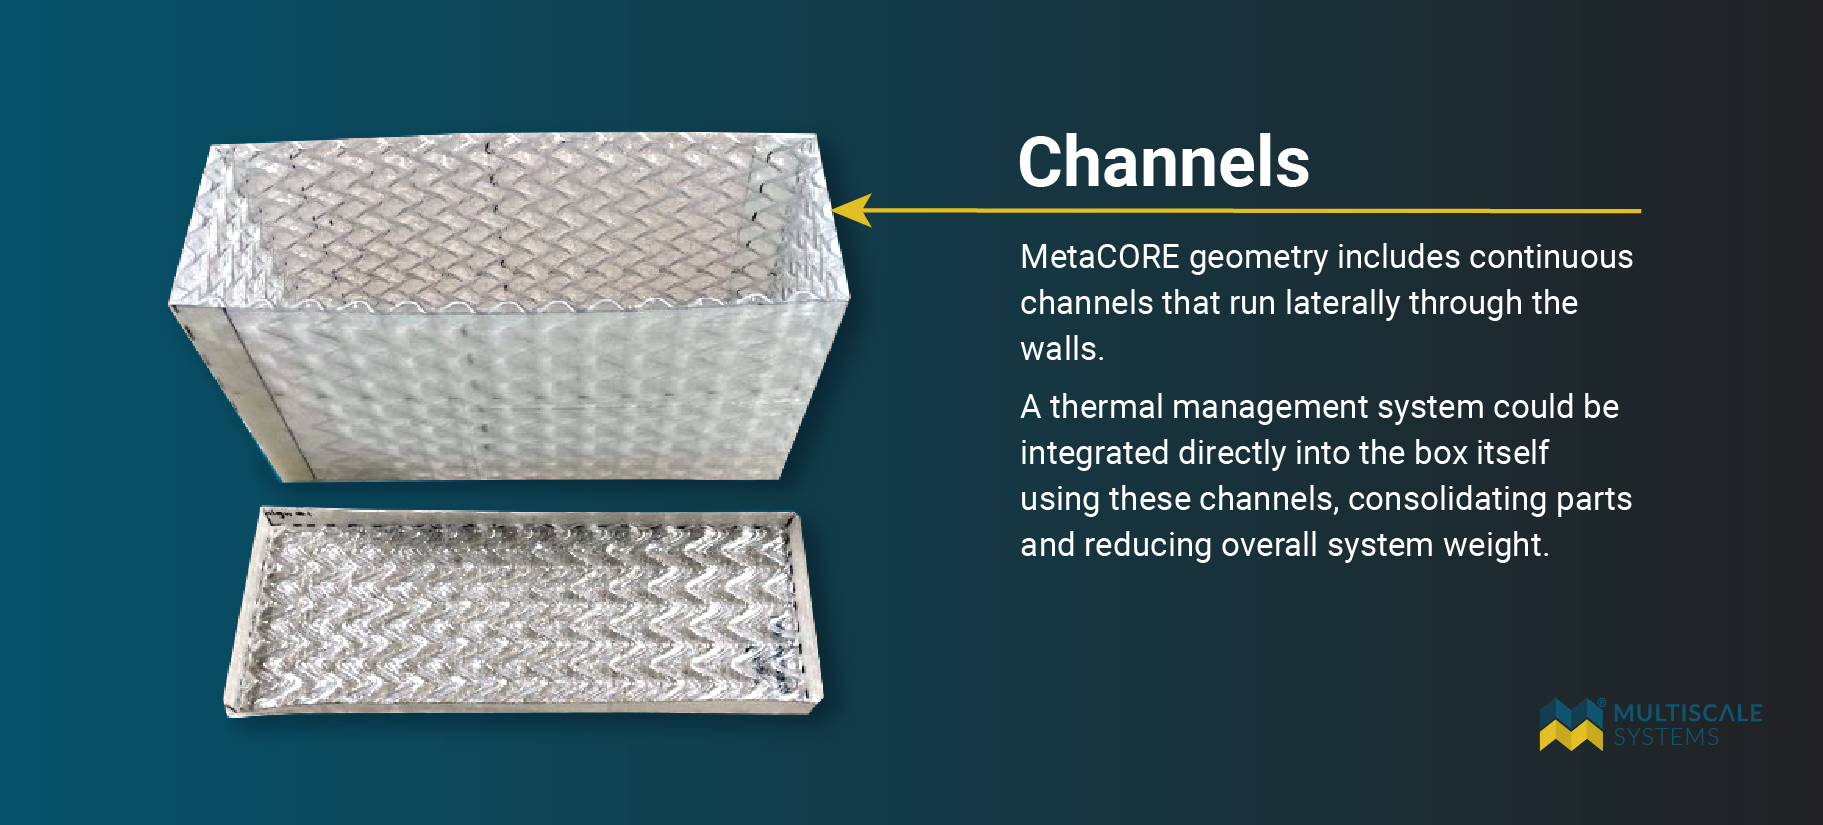 channels built within the metacore geometry can allow for a secondary thermal regulation system without adding additional structure or weight to the battery box.